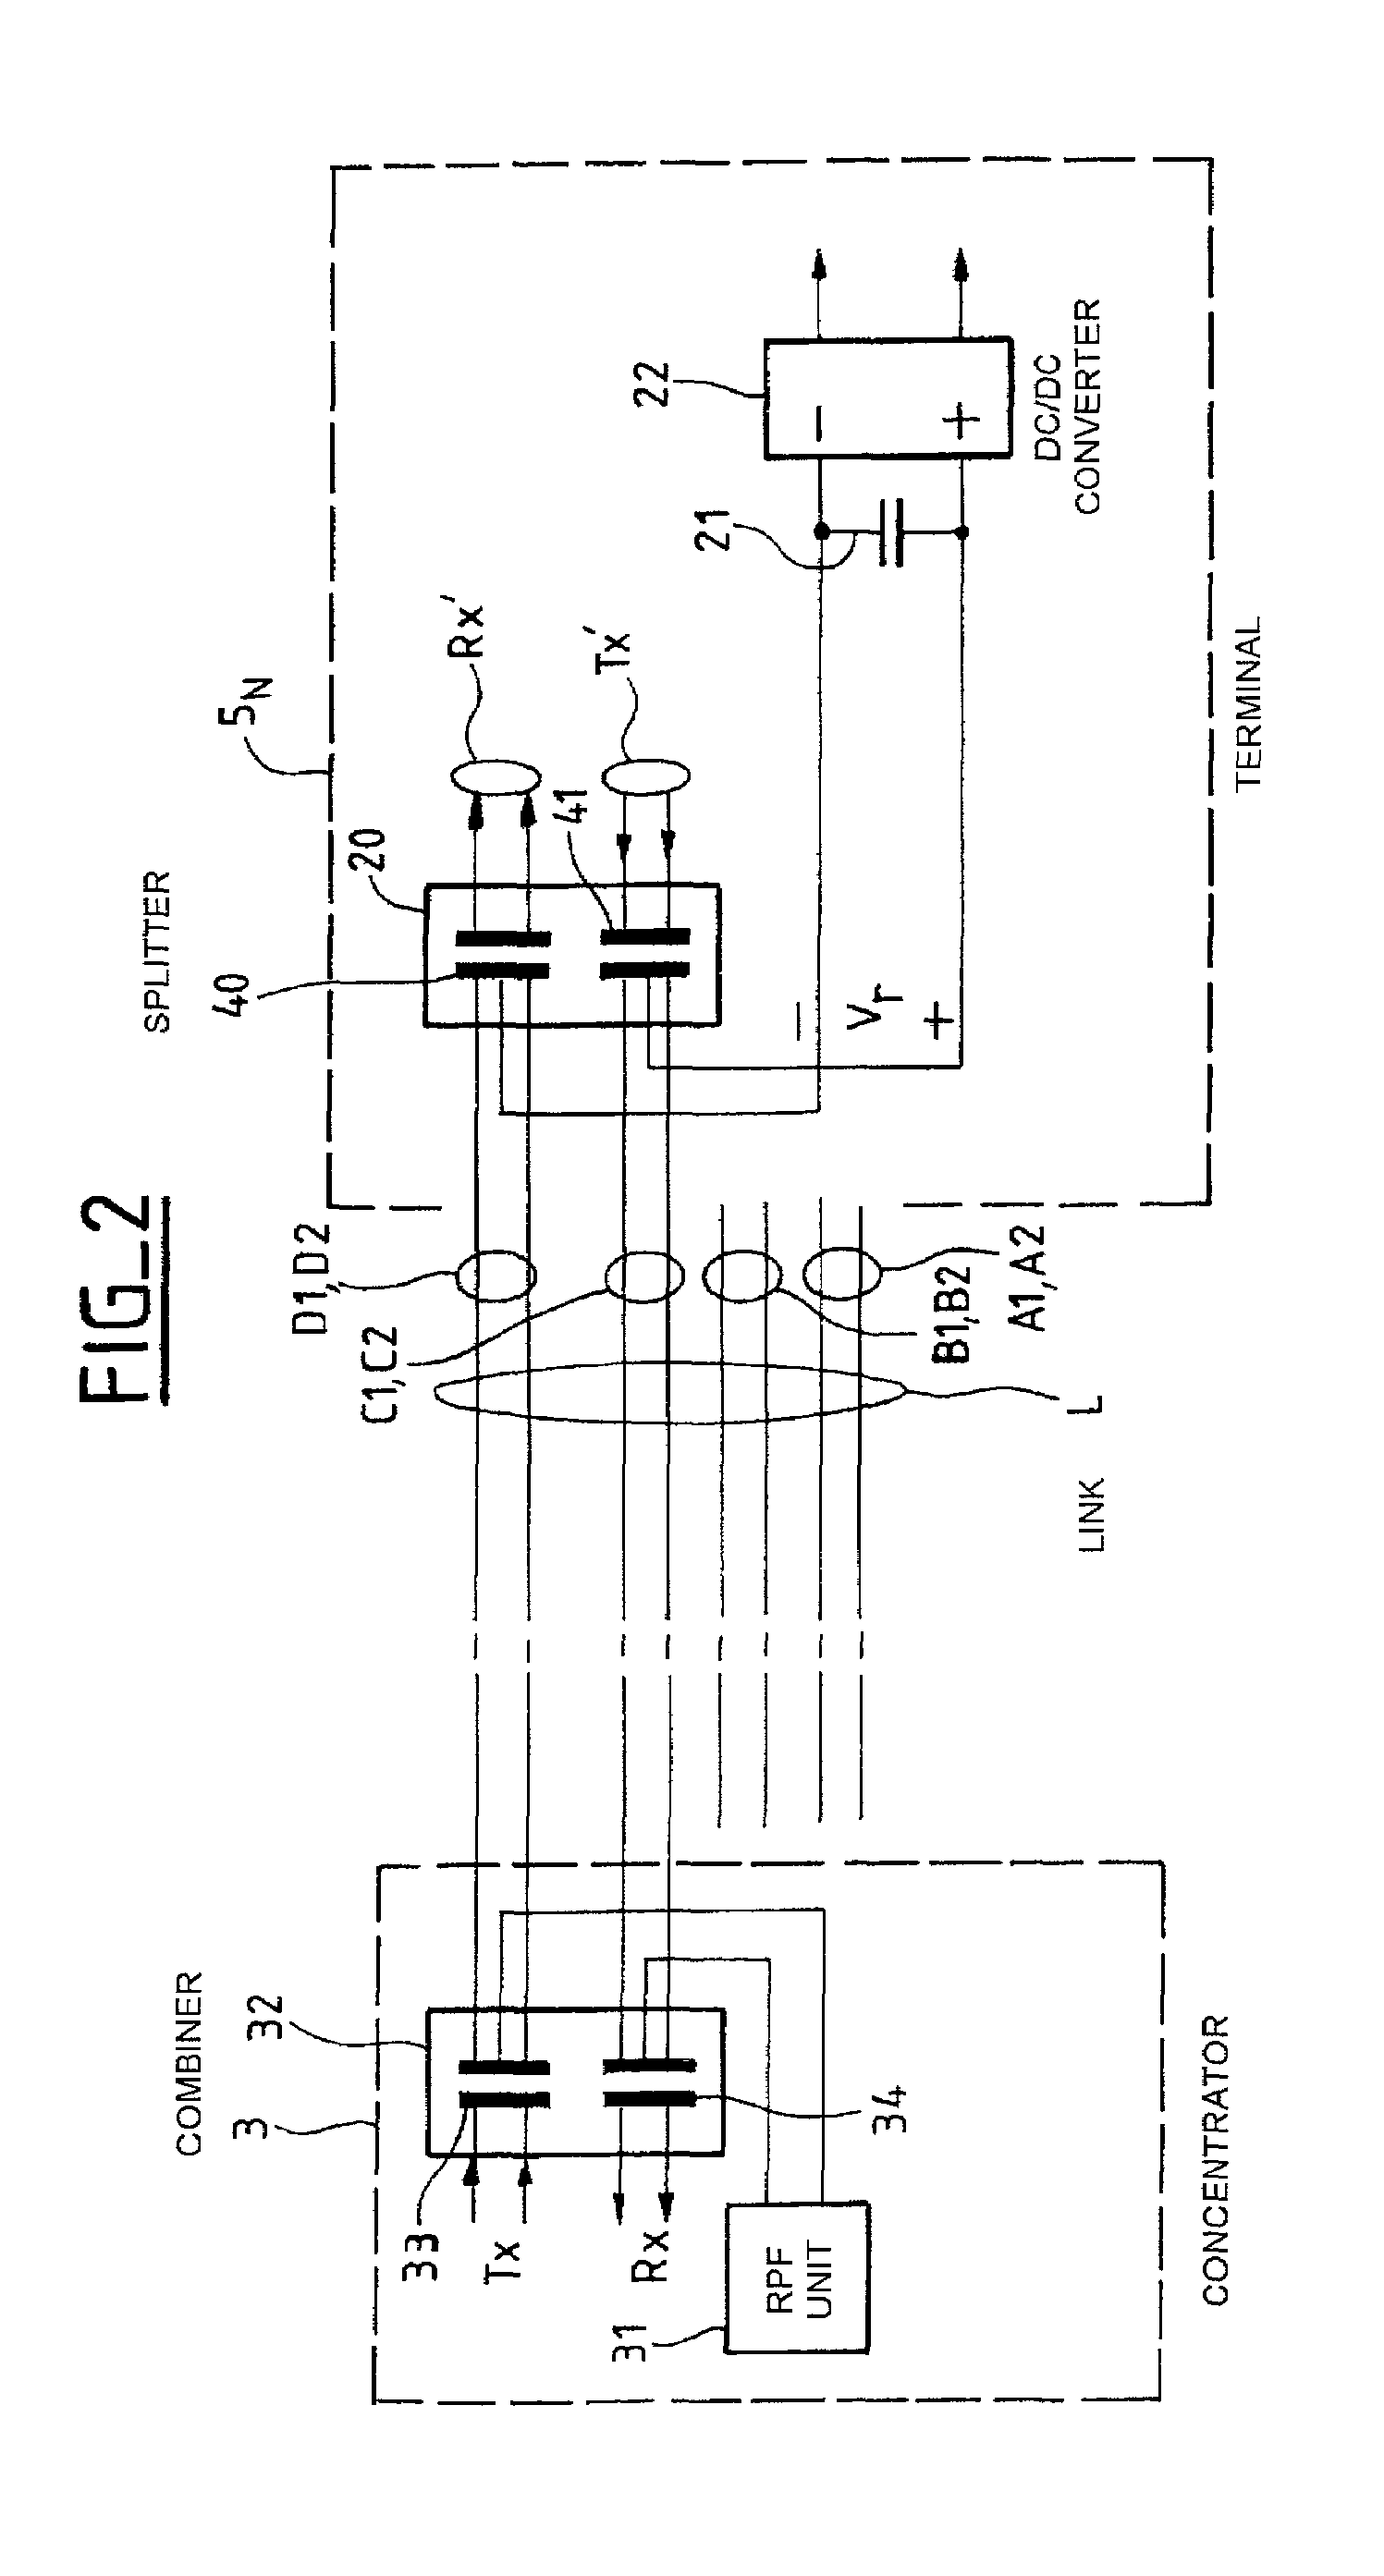 Device for remote power feeding a terminal in a telecommunication network, and a concentrator and a repreater including the device